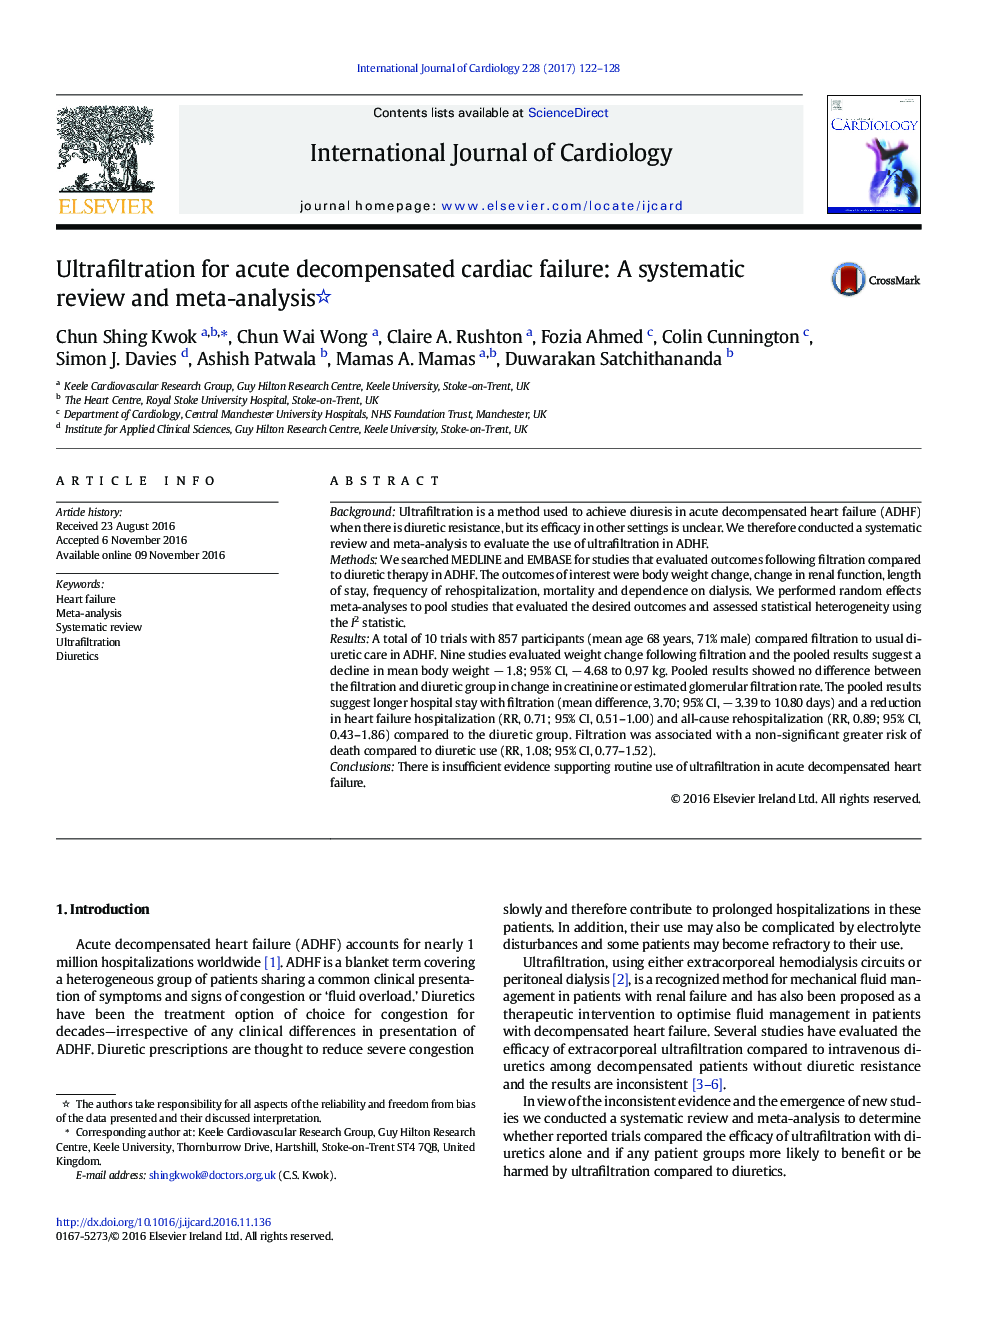 Ultrafiltration for acute decompensated cardiac failure: A systematic review and meta-analysis